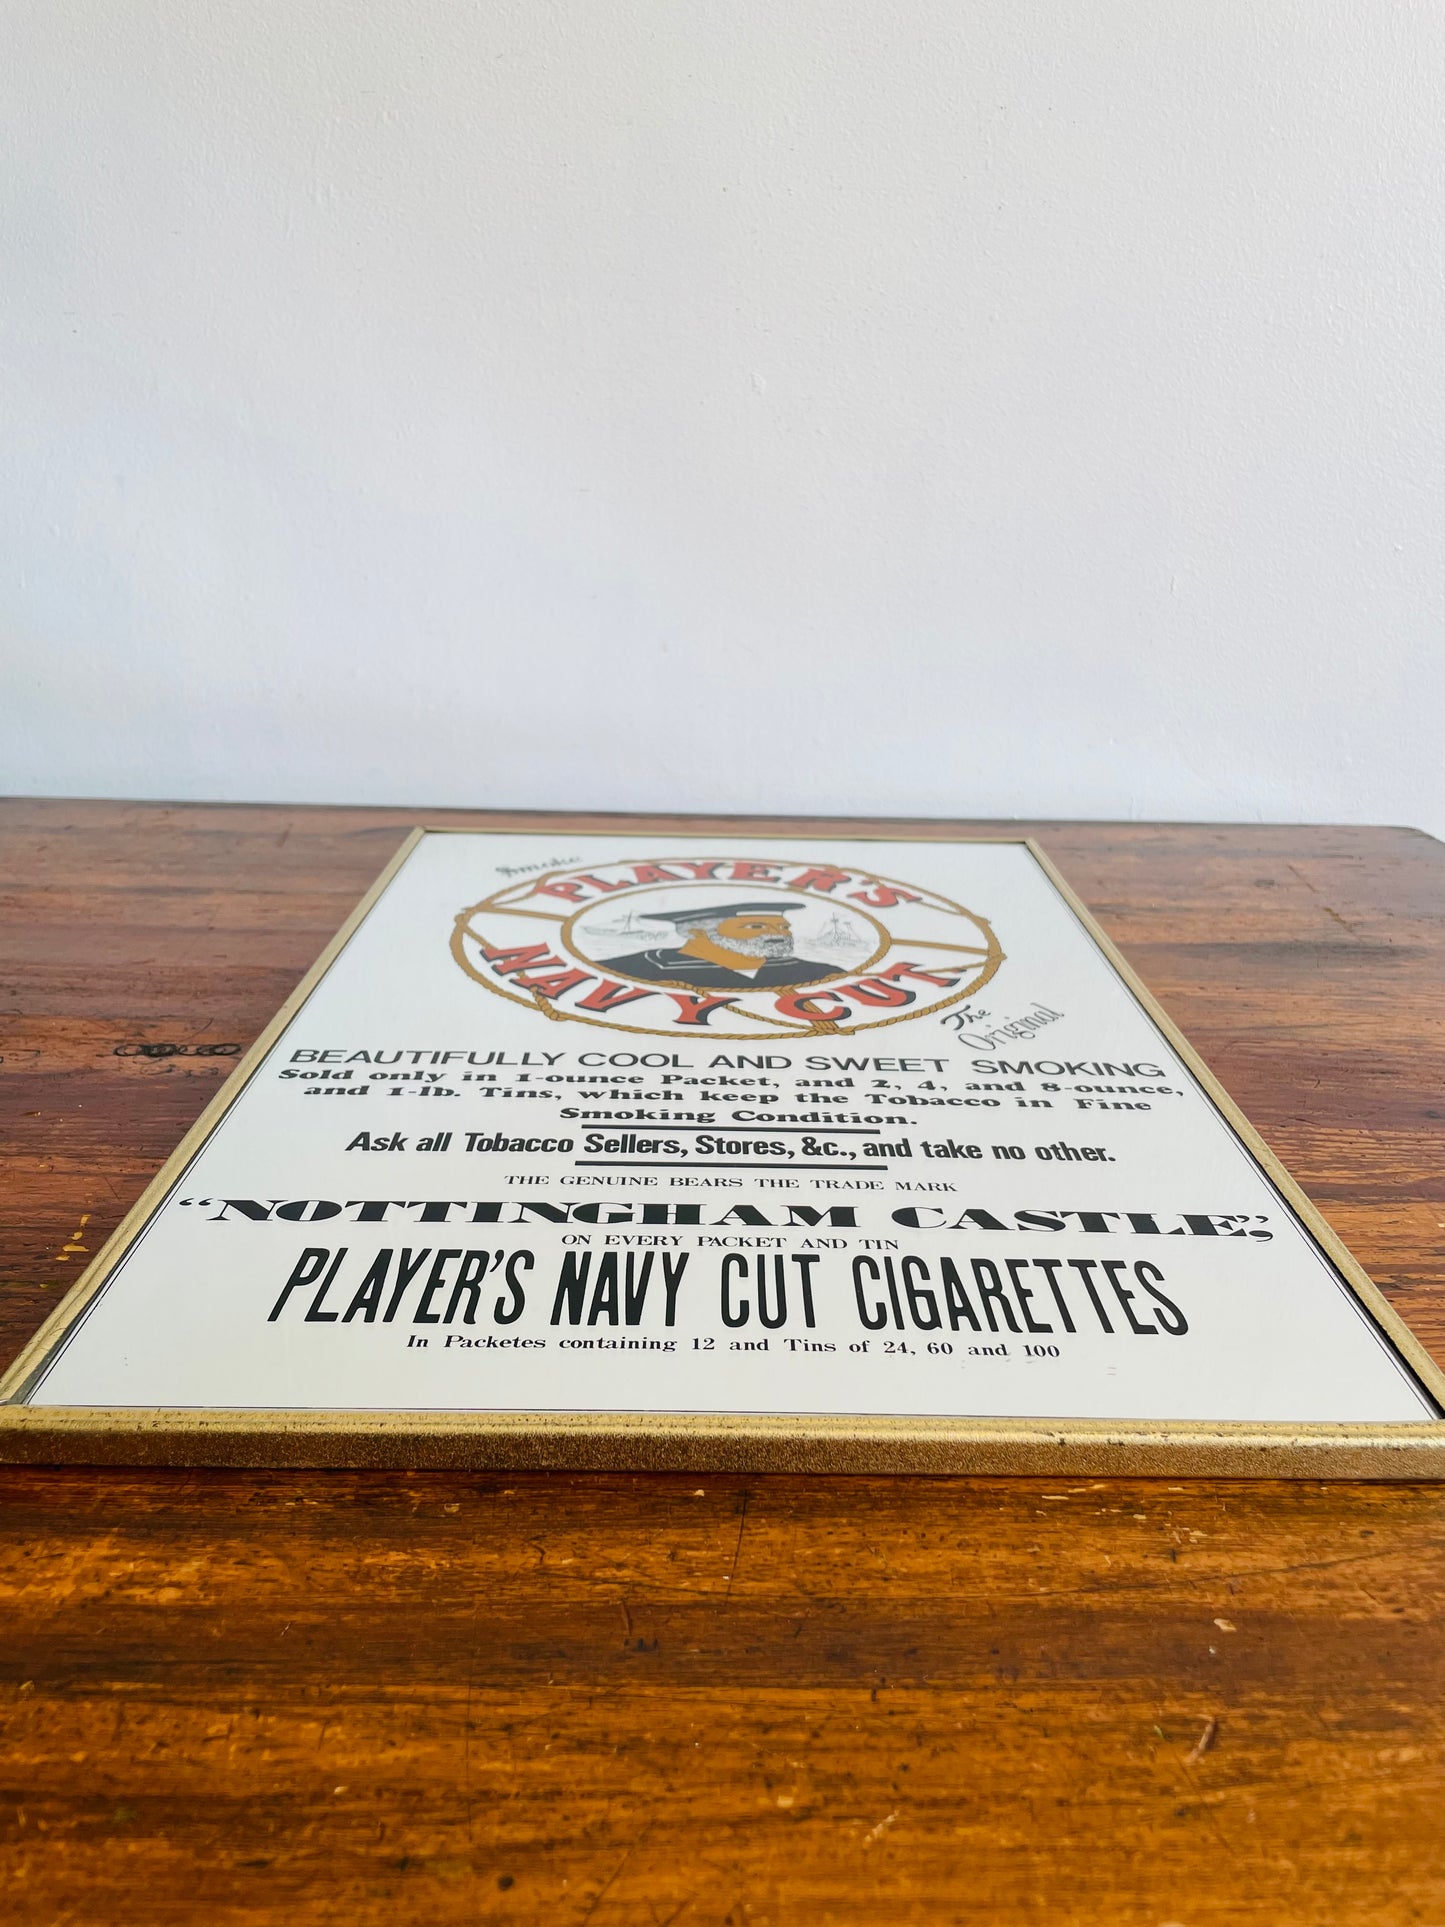 Advertising Mirror Sign - Smoke Player's Navy Cut Cigarettes - Dareco Industries Ltd. Made in Japan